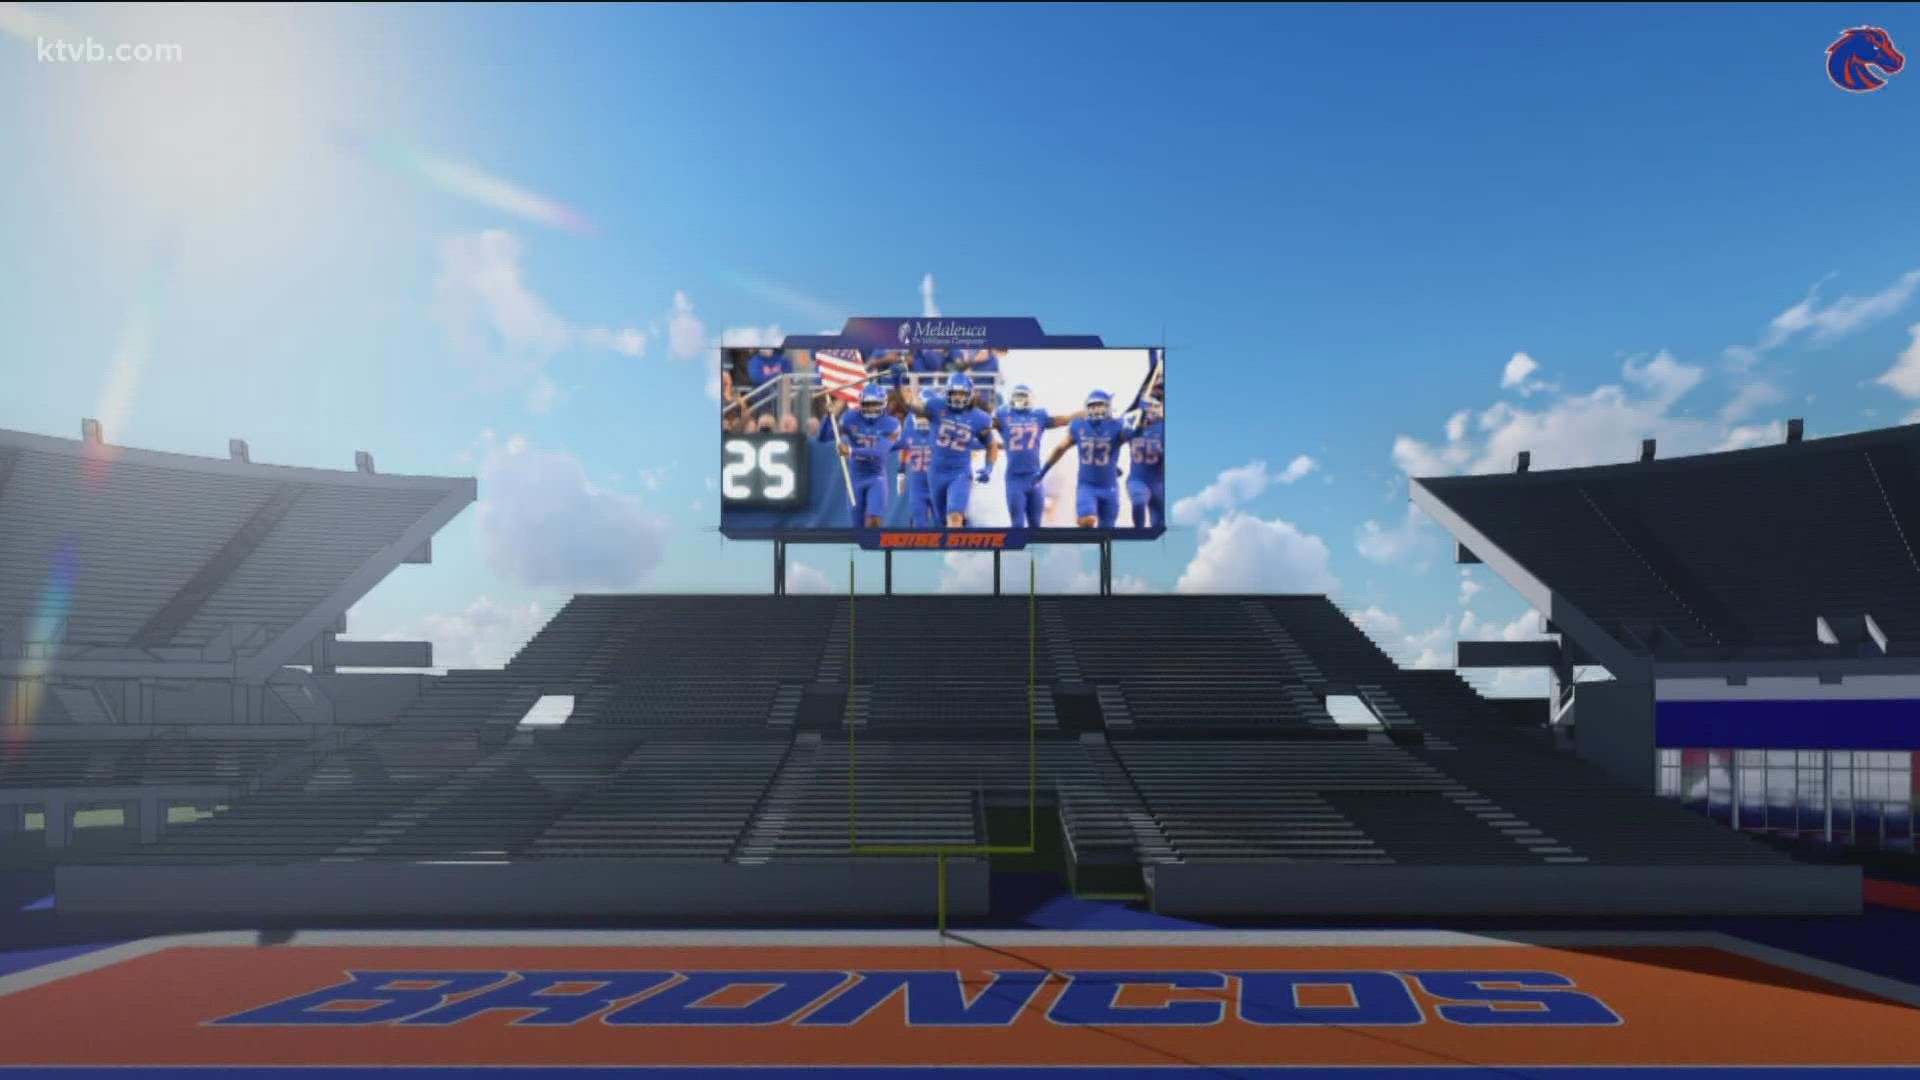 Melaleuca, a health products manufacturer based in Idaho Falls, donated $4.5 million to Boise State Athletics for the project.